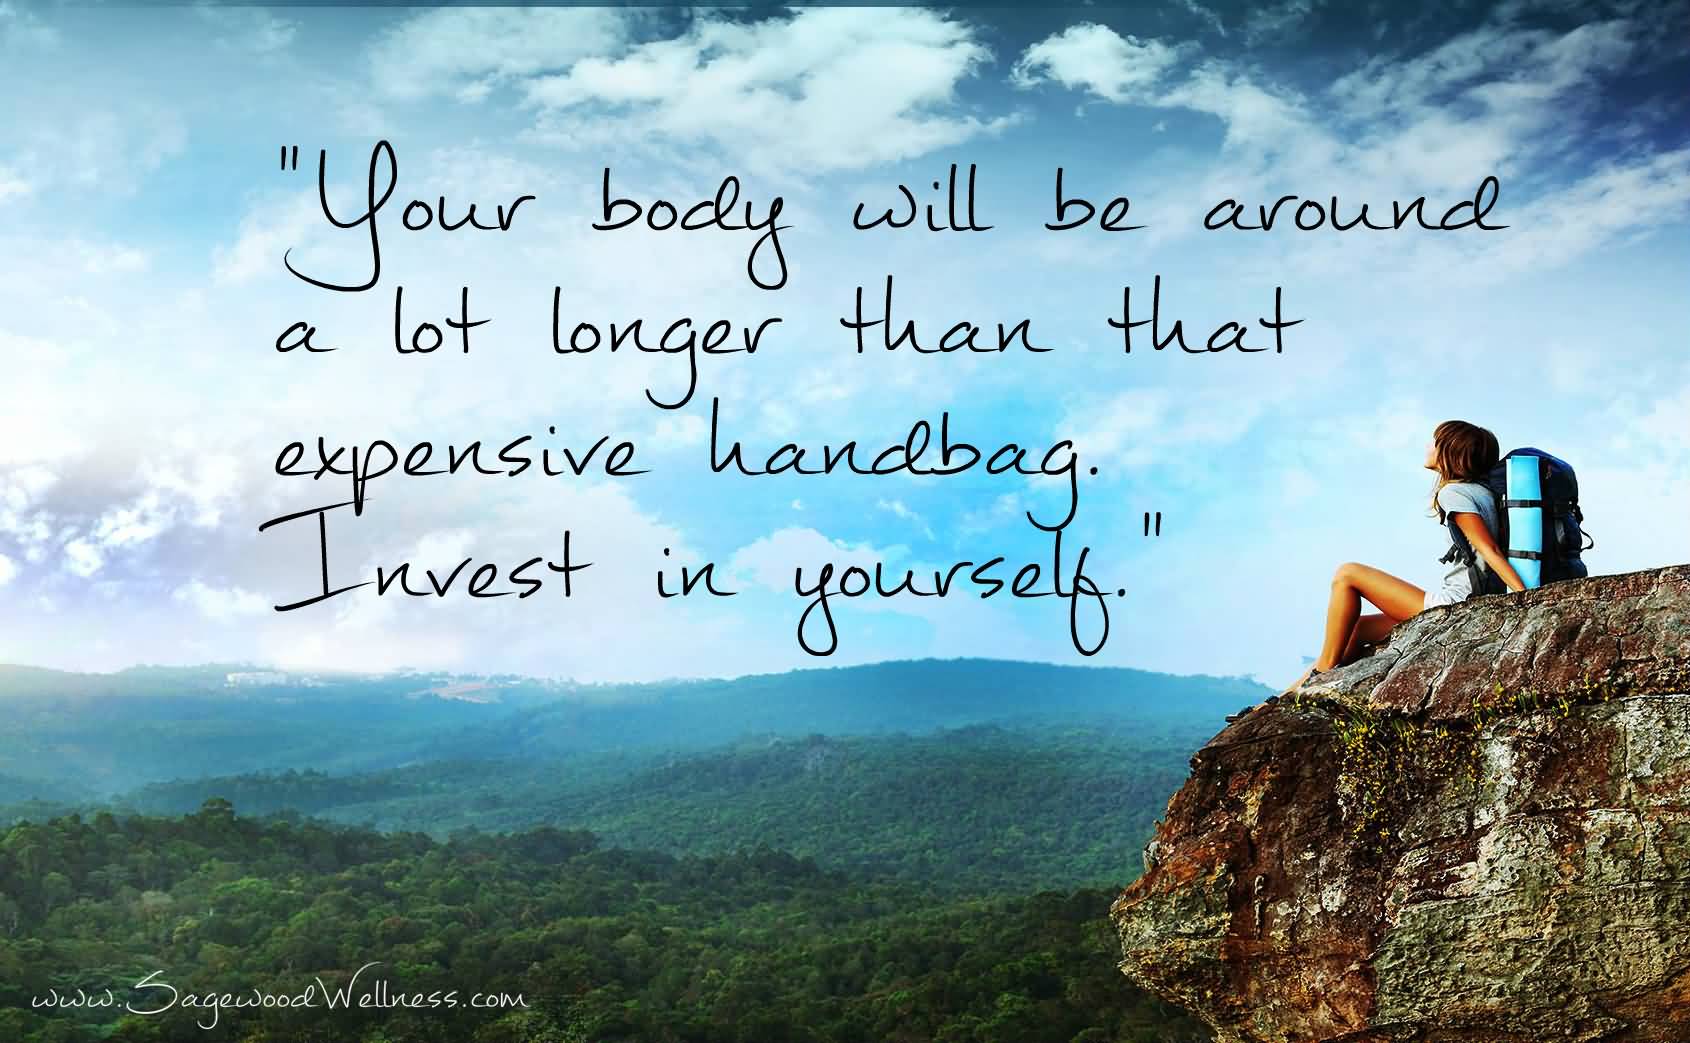 Inspirational Nature Quotes and Sayings Your Body Will Be